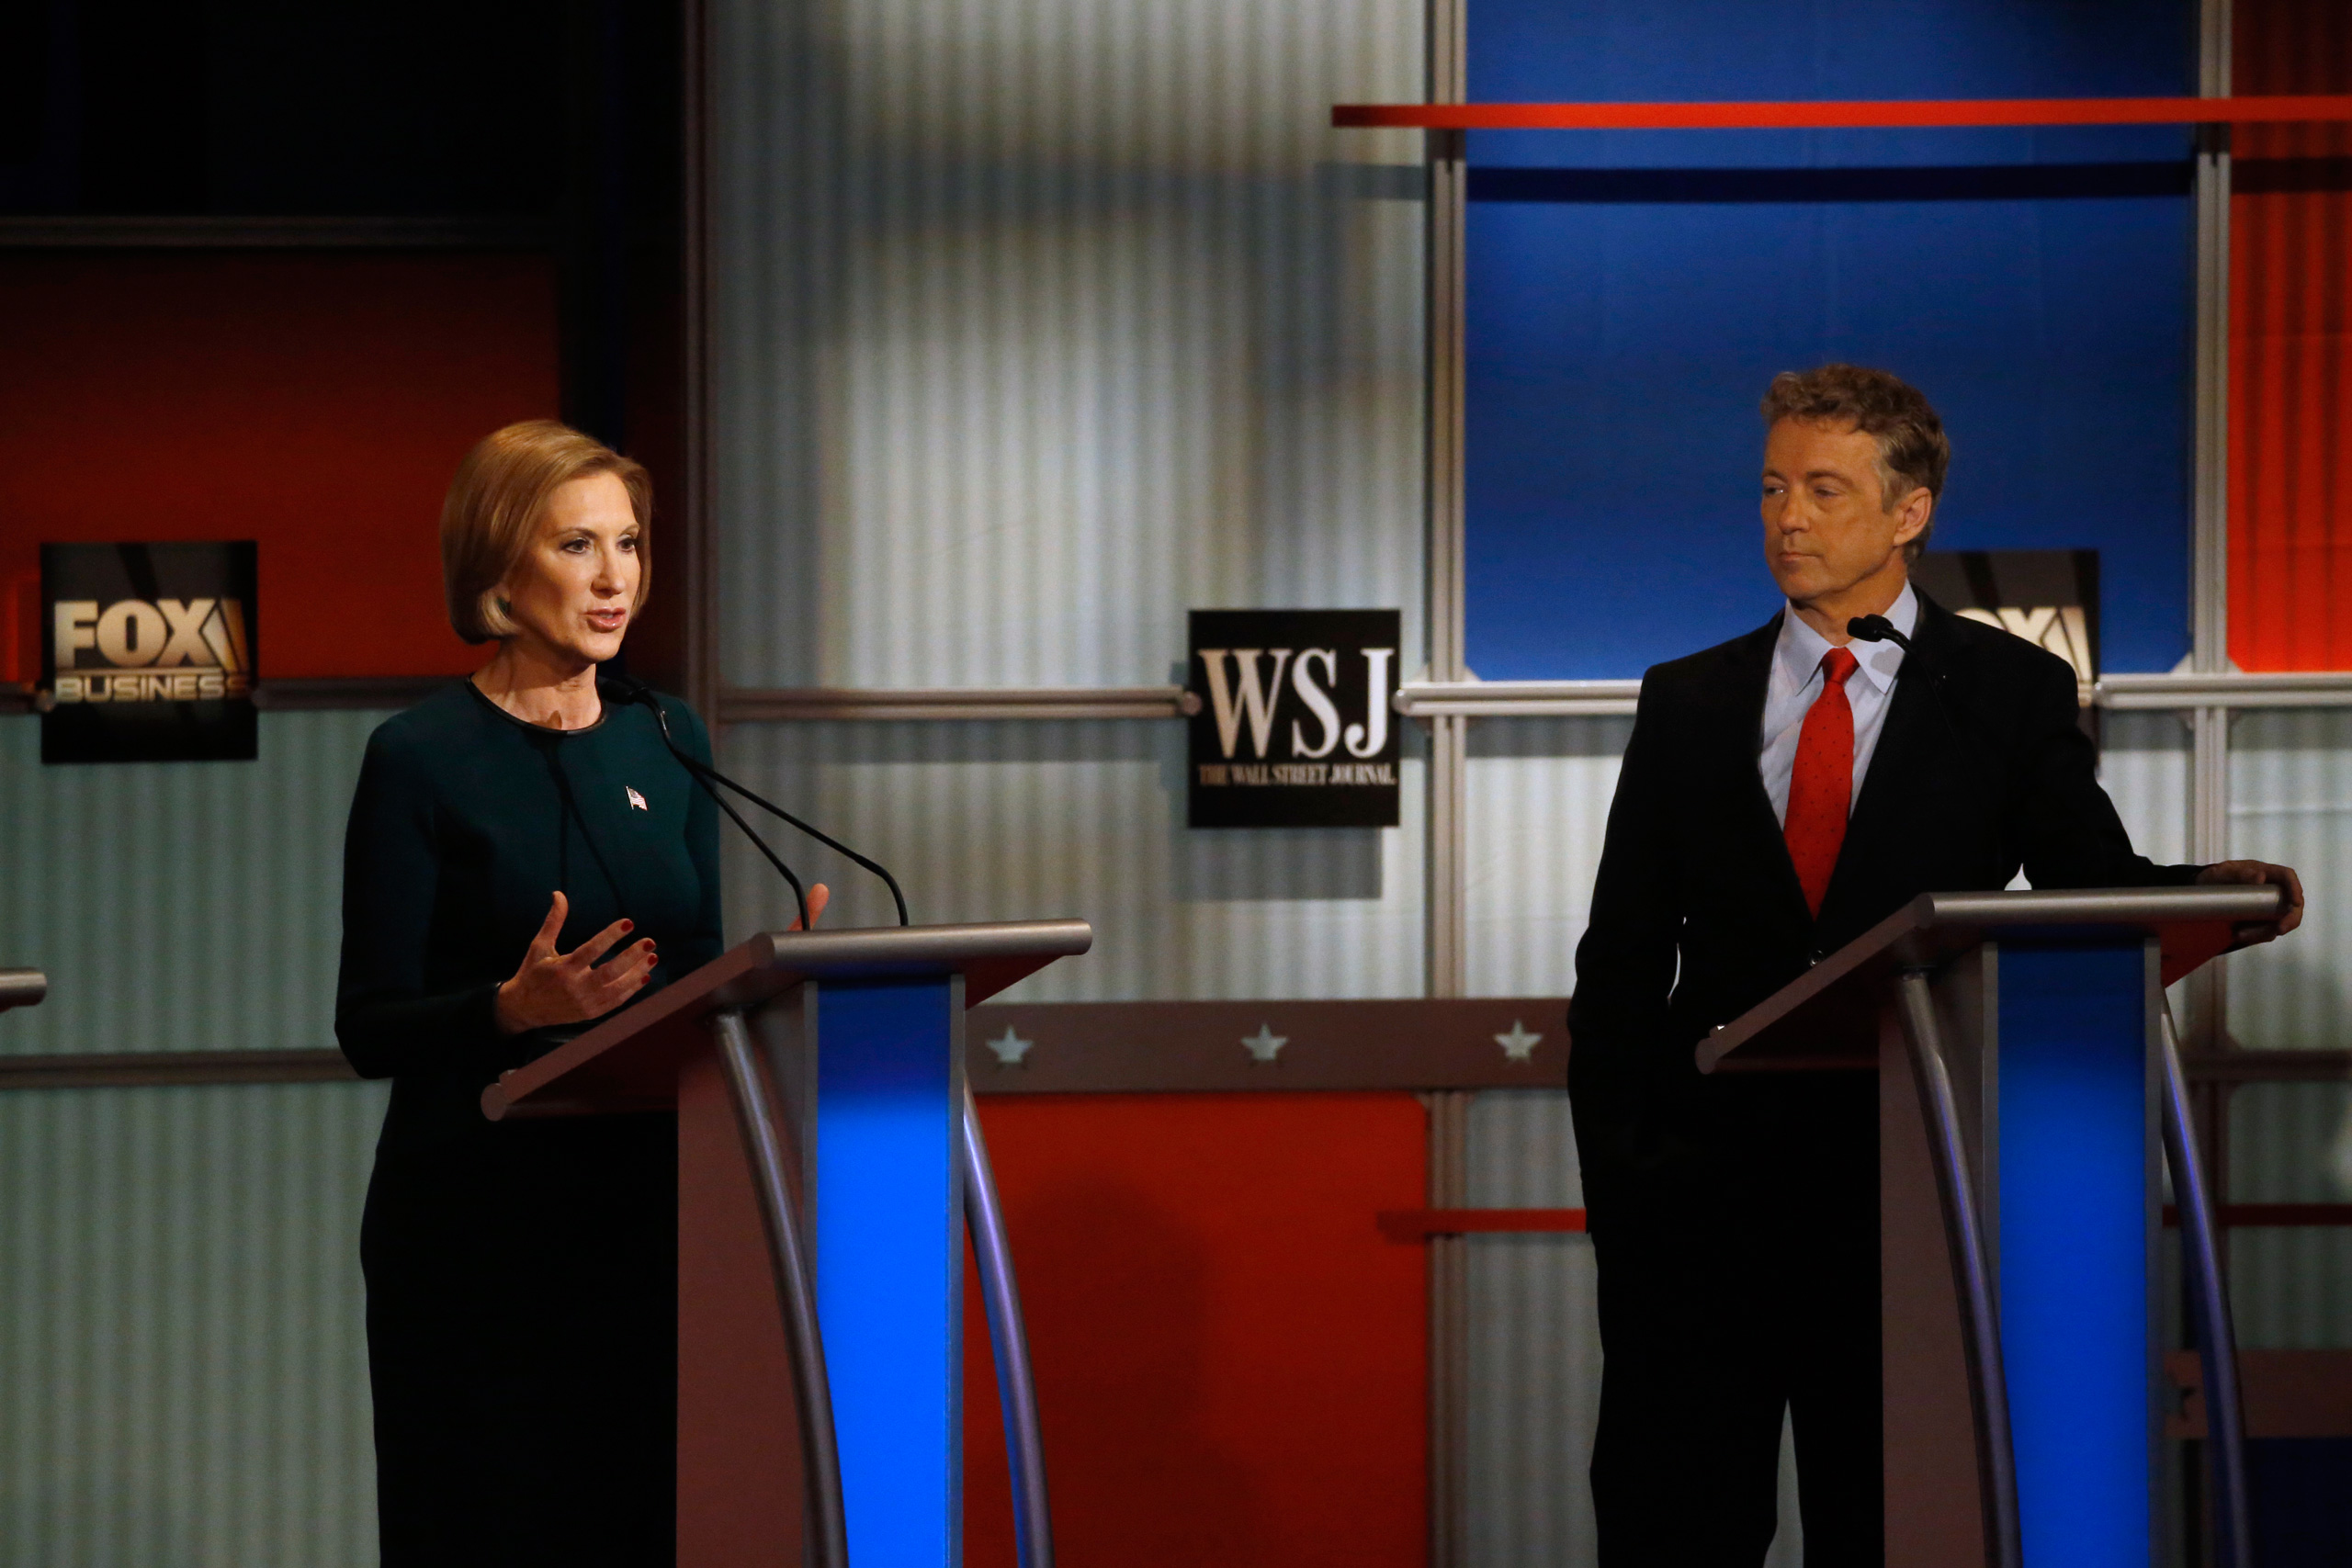 Carly Fiorina speaks as Rand Paul listens during the Republican presidential debate at the Milwaukee Theatre, Wednesday, Nov. 11, 2015, in Milwaukee. (AP Photo/Morry Gash)